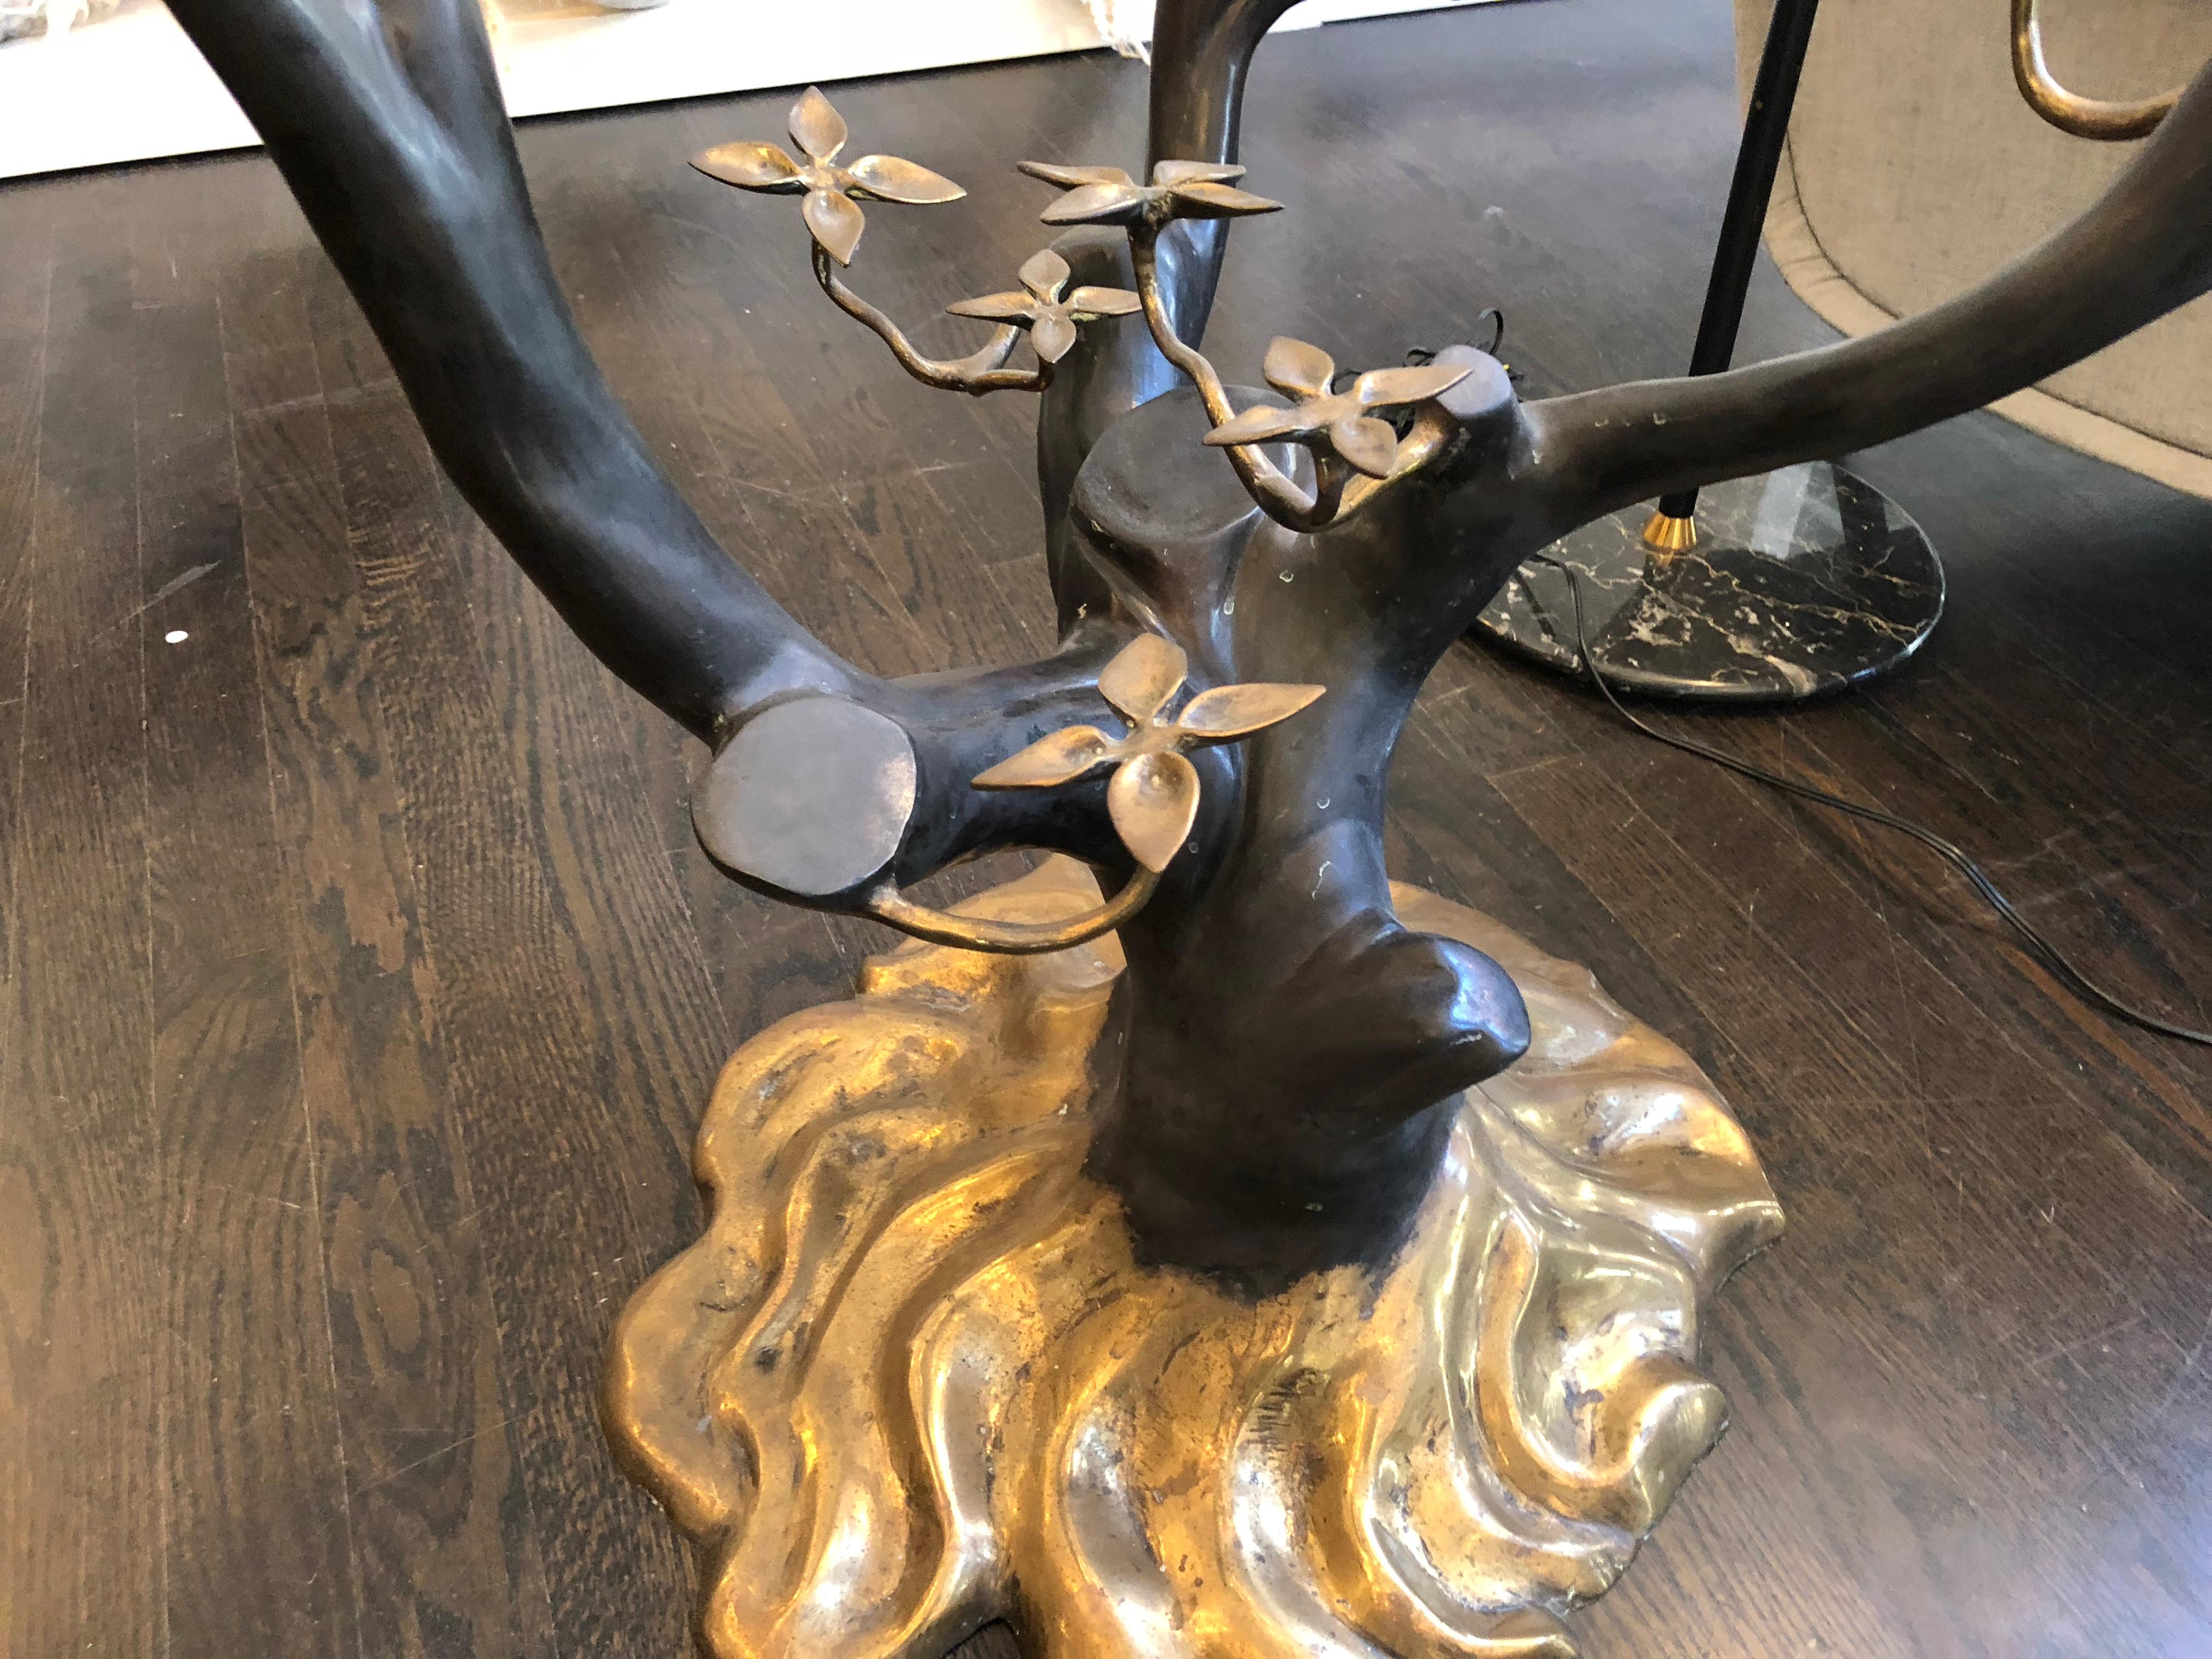 This rare table is made of high quality bronze in the shape of a flowering tree with brass petals. Crafted with a fine eye for detail creating the true feel of trunk, roots and nerves, in a deep brown color with Brass details (leaves). The table has